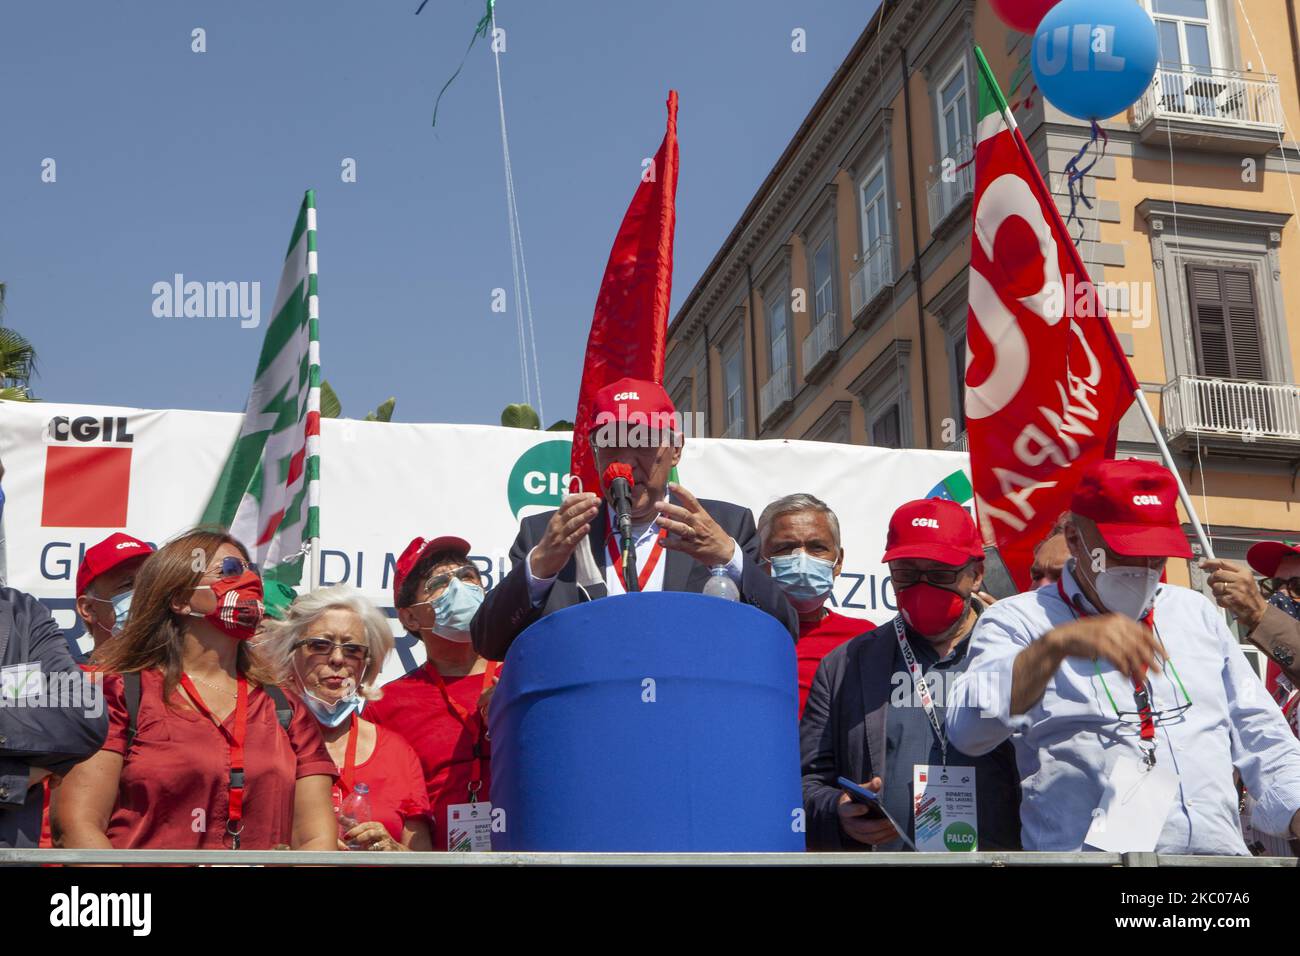 The secretary of the Cgil Maurizio Landini speaks during the demonstration of Trade Unions CGIL, CISL And UIL In Naples, Italy, on September 18, 2020. (Photo by Stephane Rouppert/NurPhoto) Stock Photo